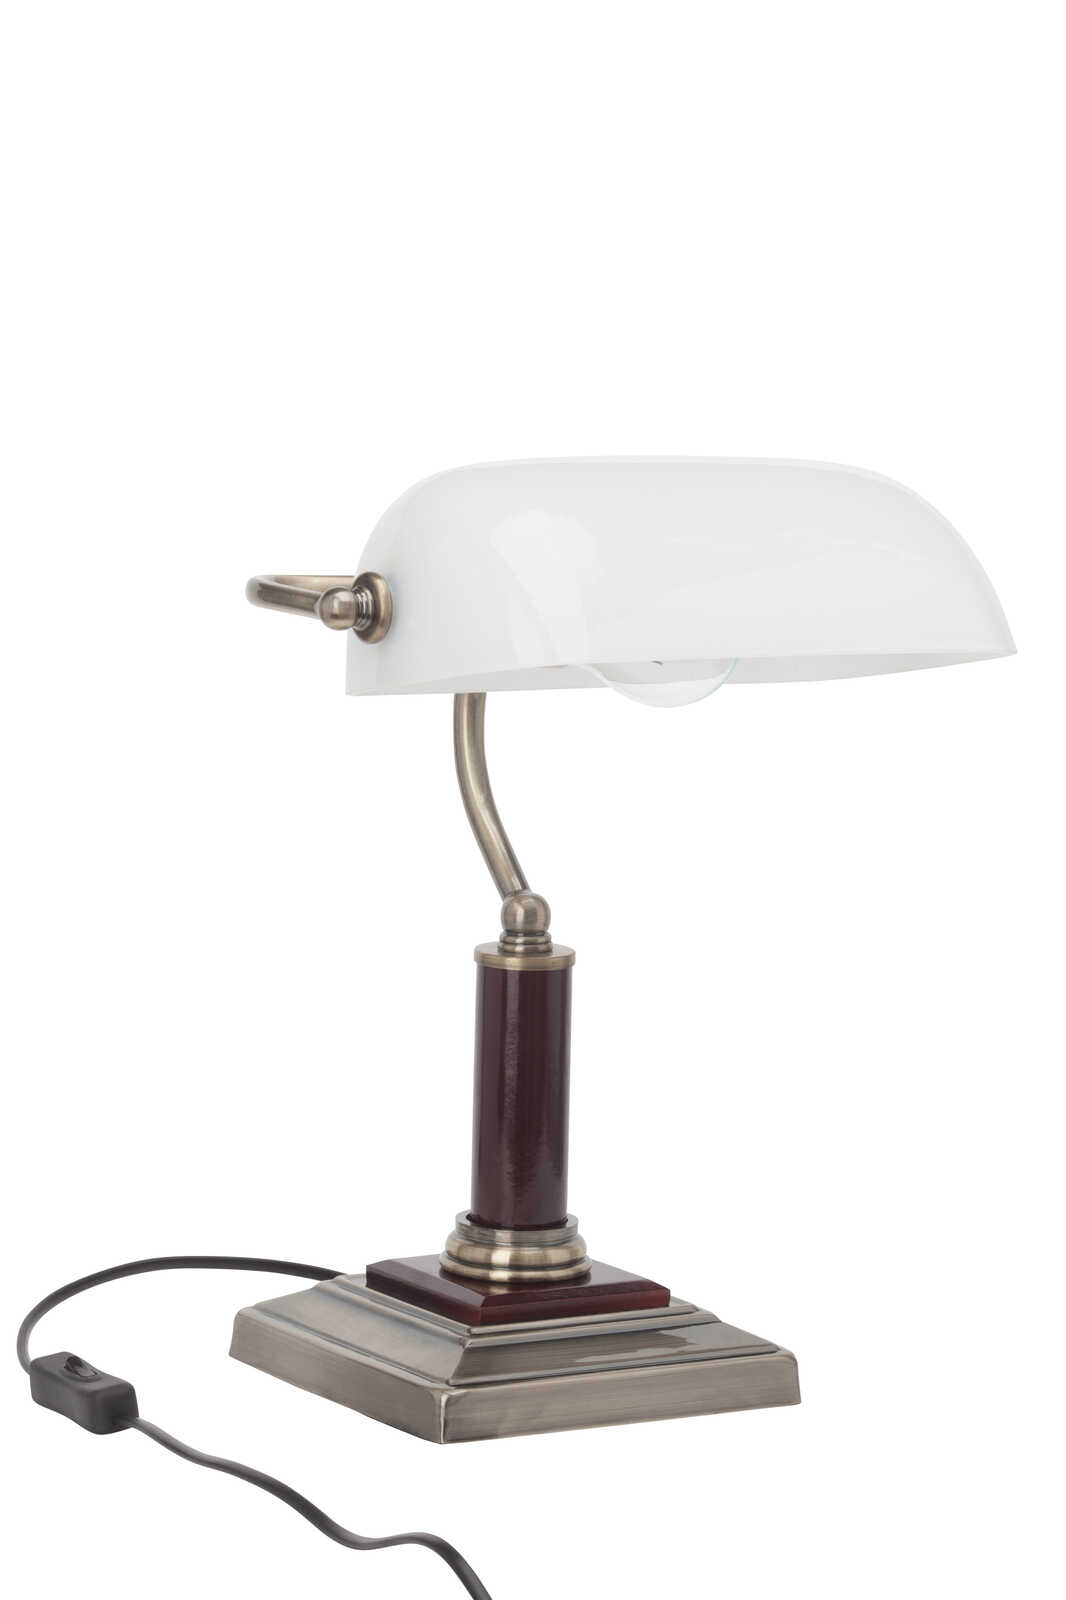             Glass table lamp - Arian - Gold
        